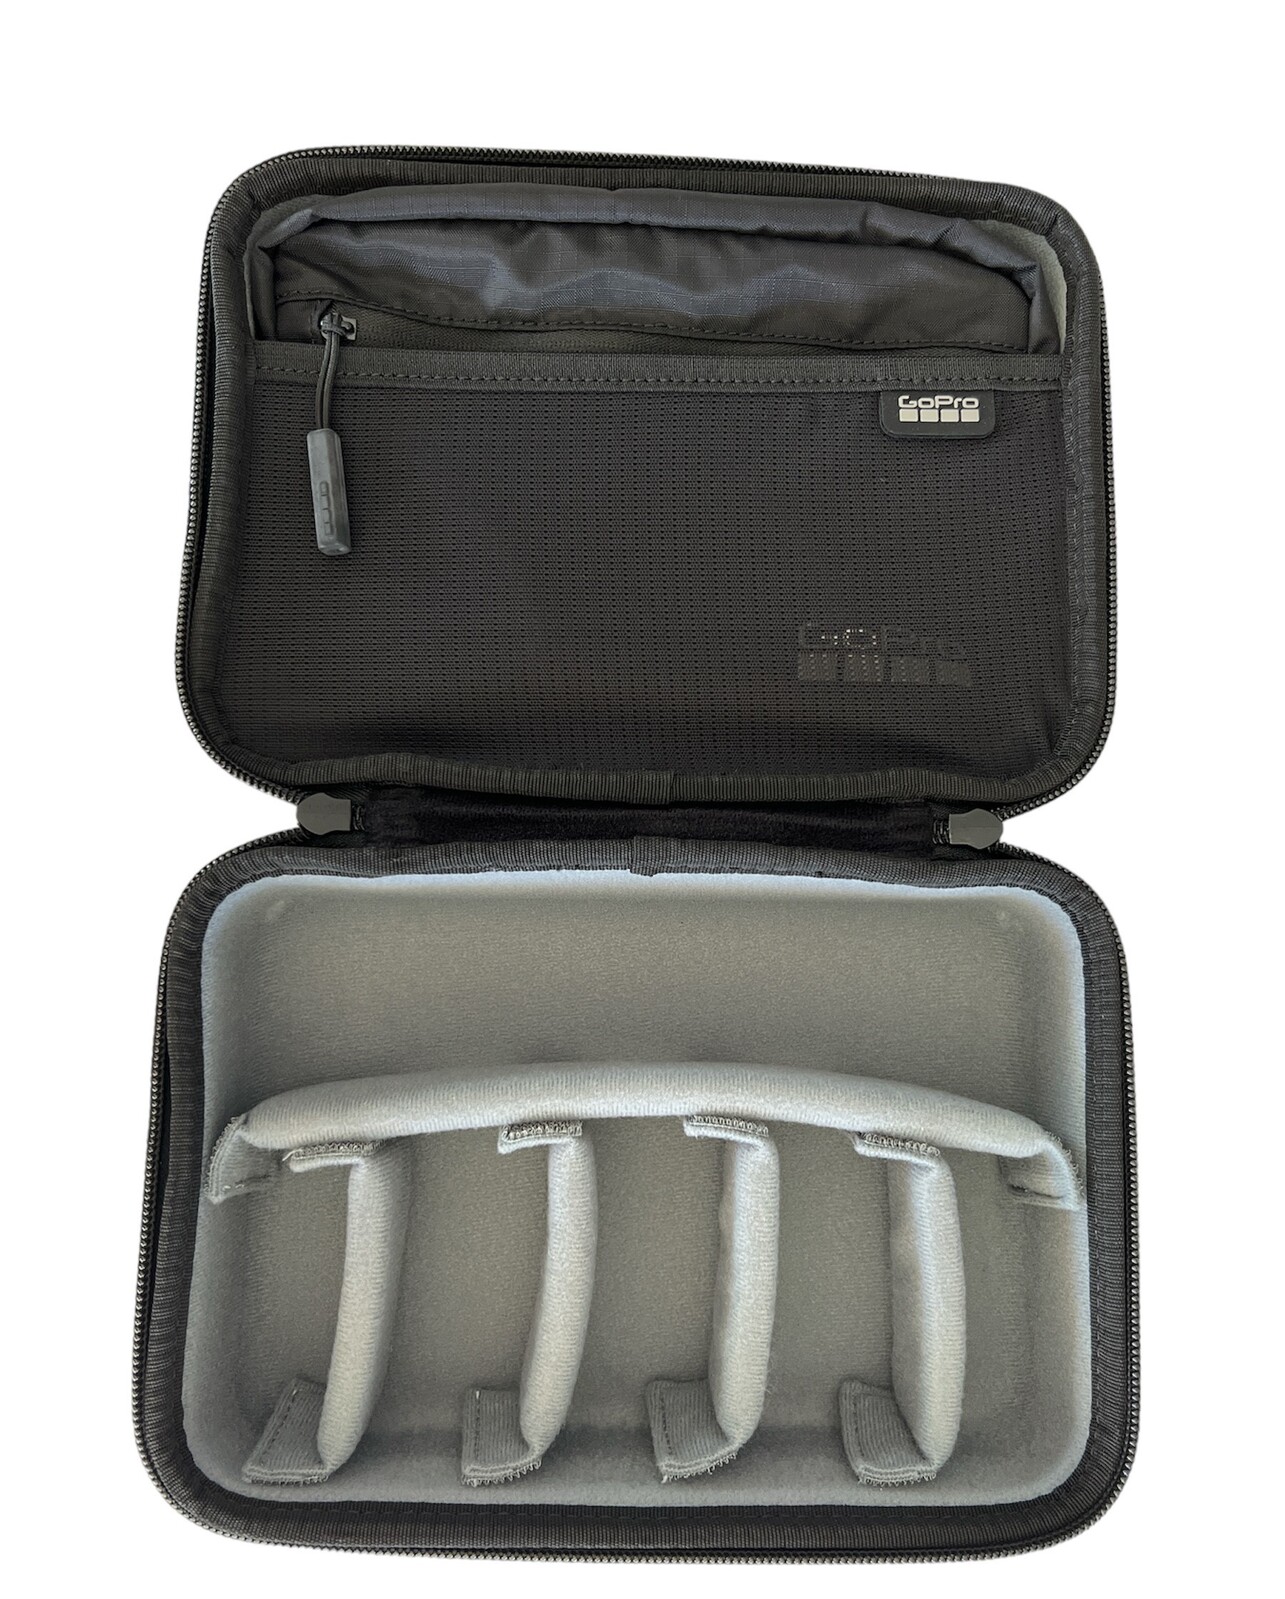 $5.24: Amazon Basics Large Carrying Case for GoPro And Accessories